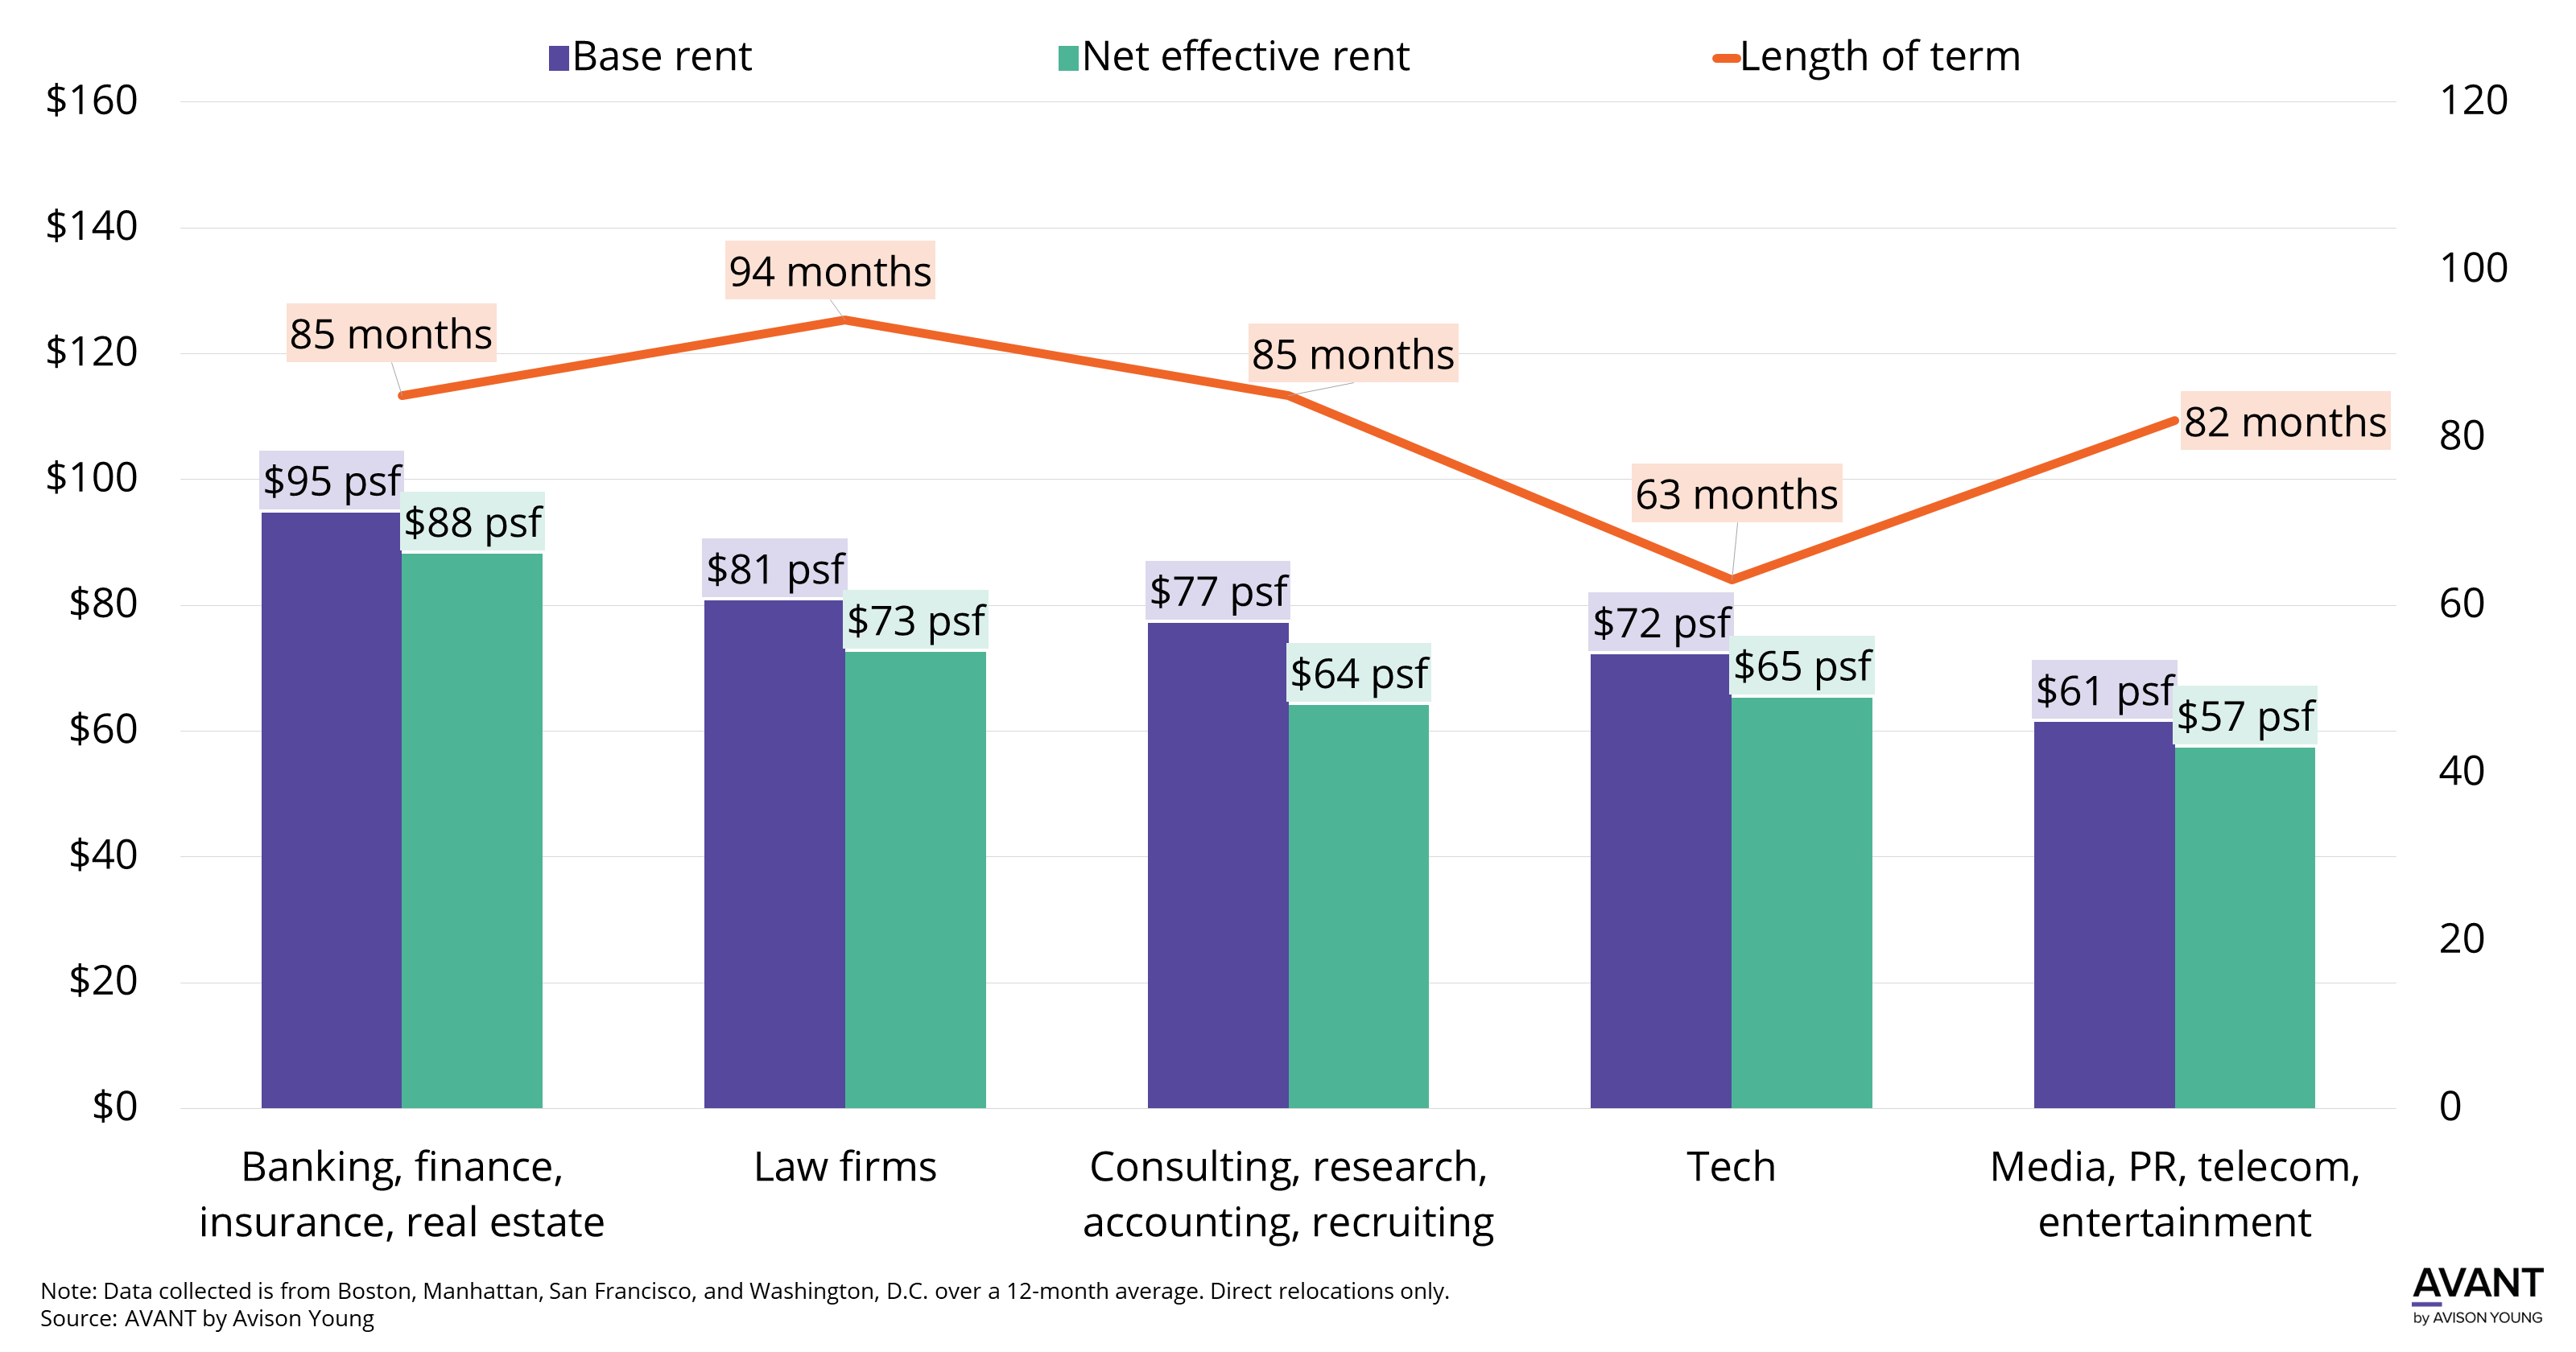 graph of base rent, net effective rent and length of term in various U.S. office leasing industries